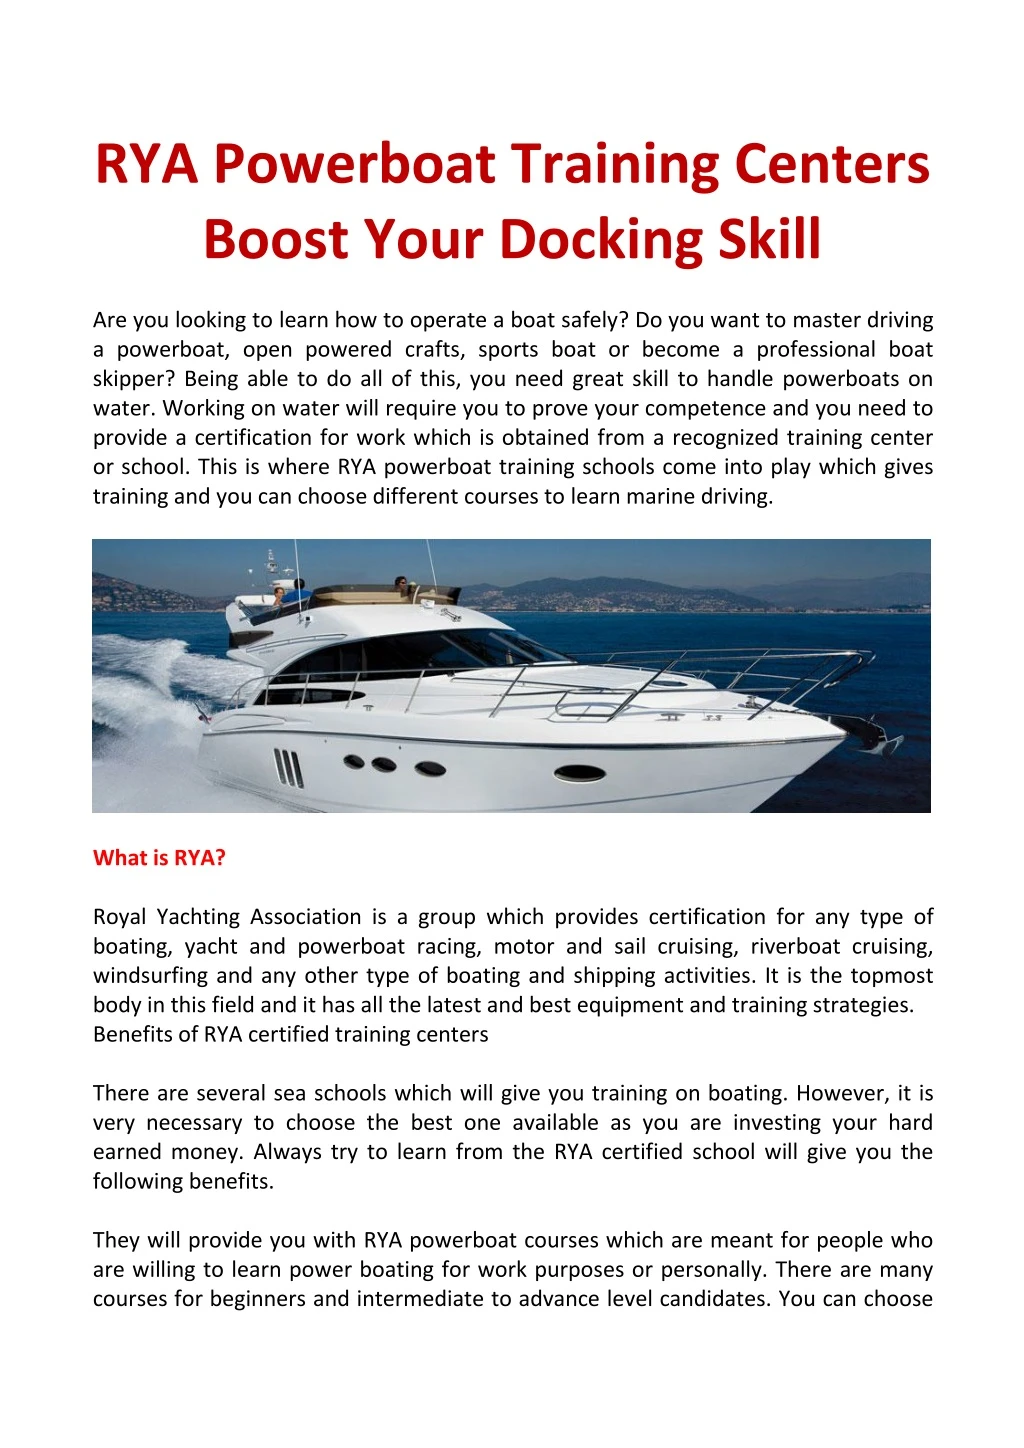 rya powerboat training centers boost your docking